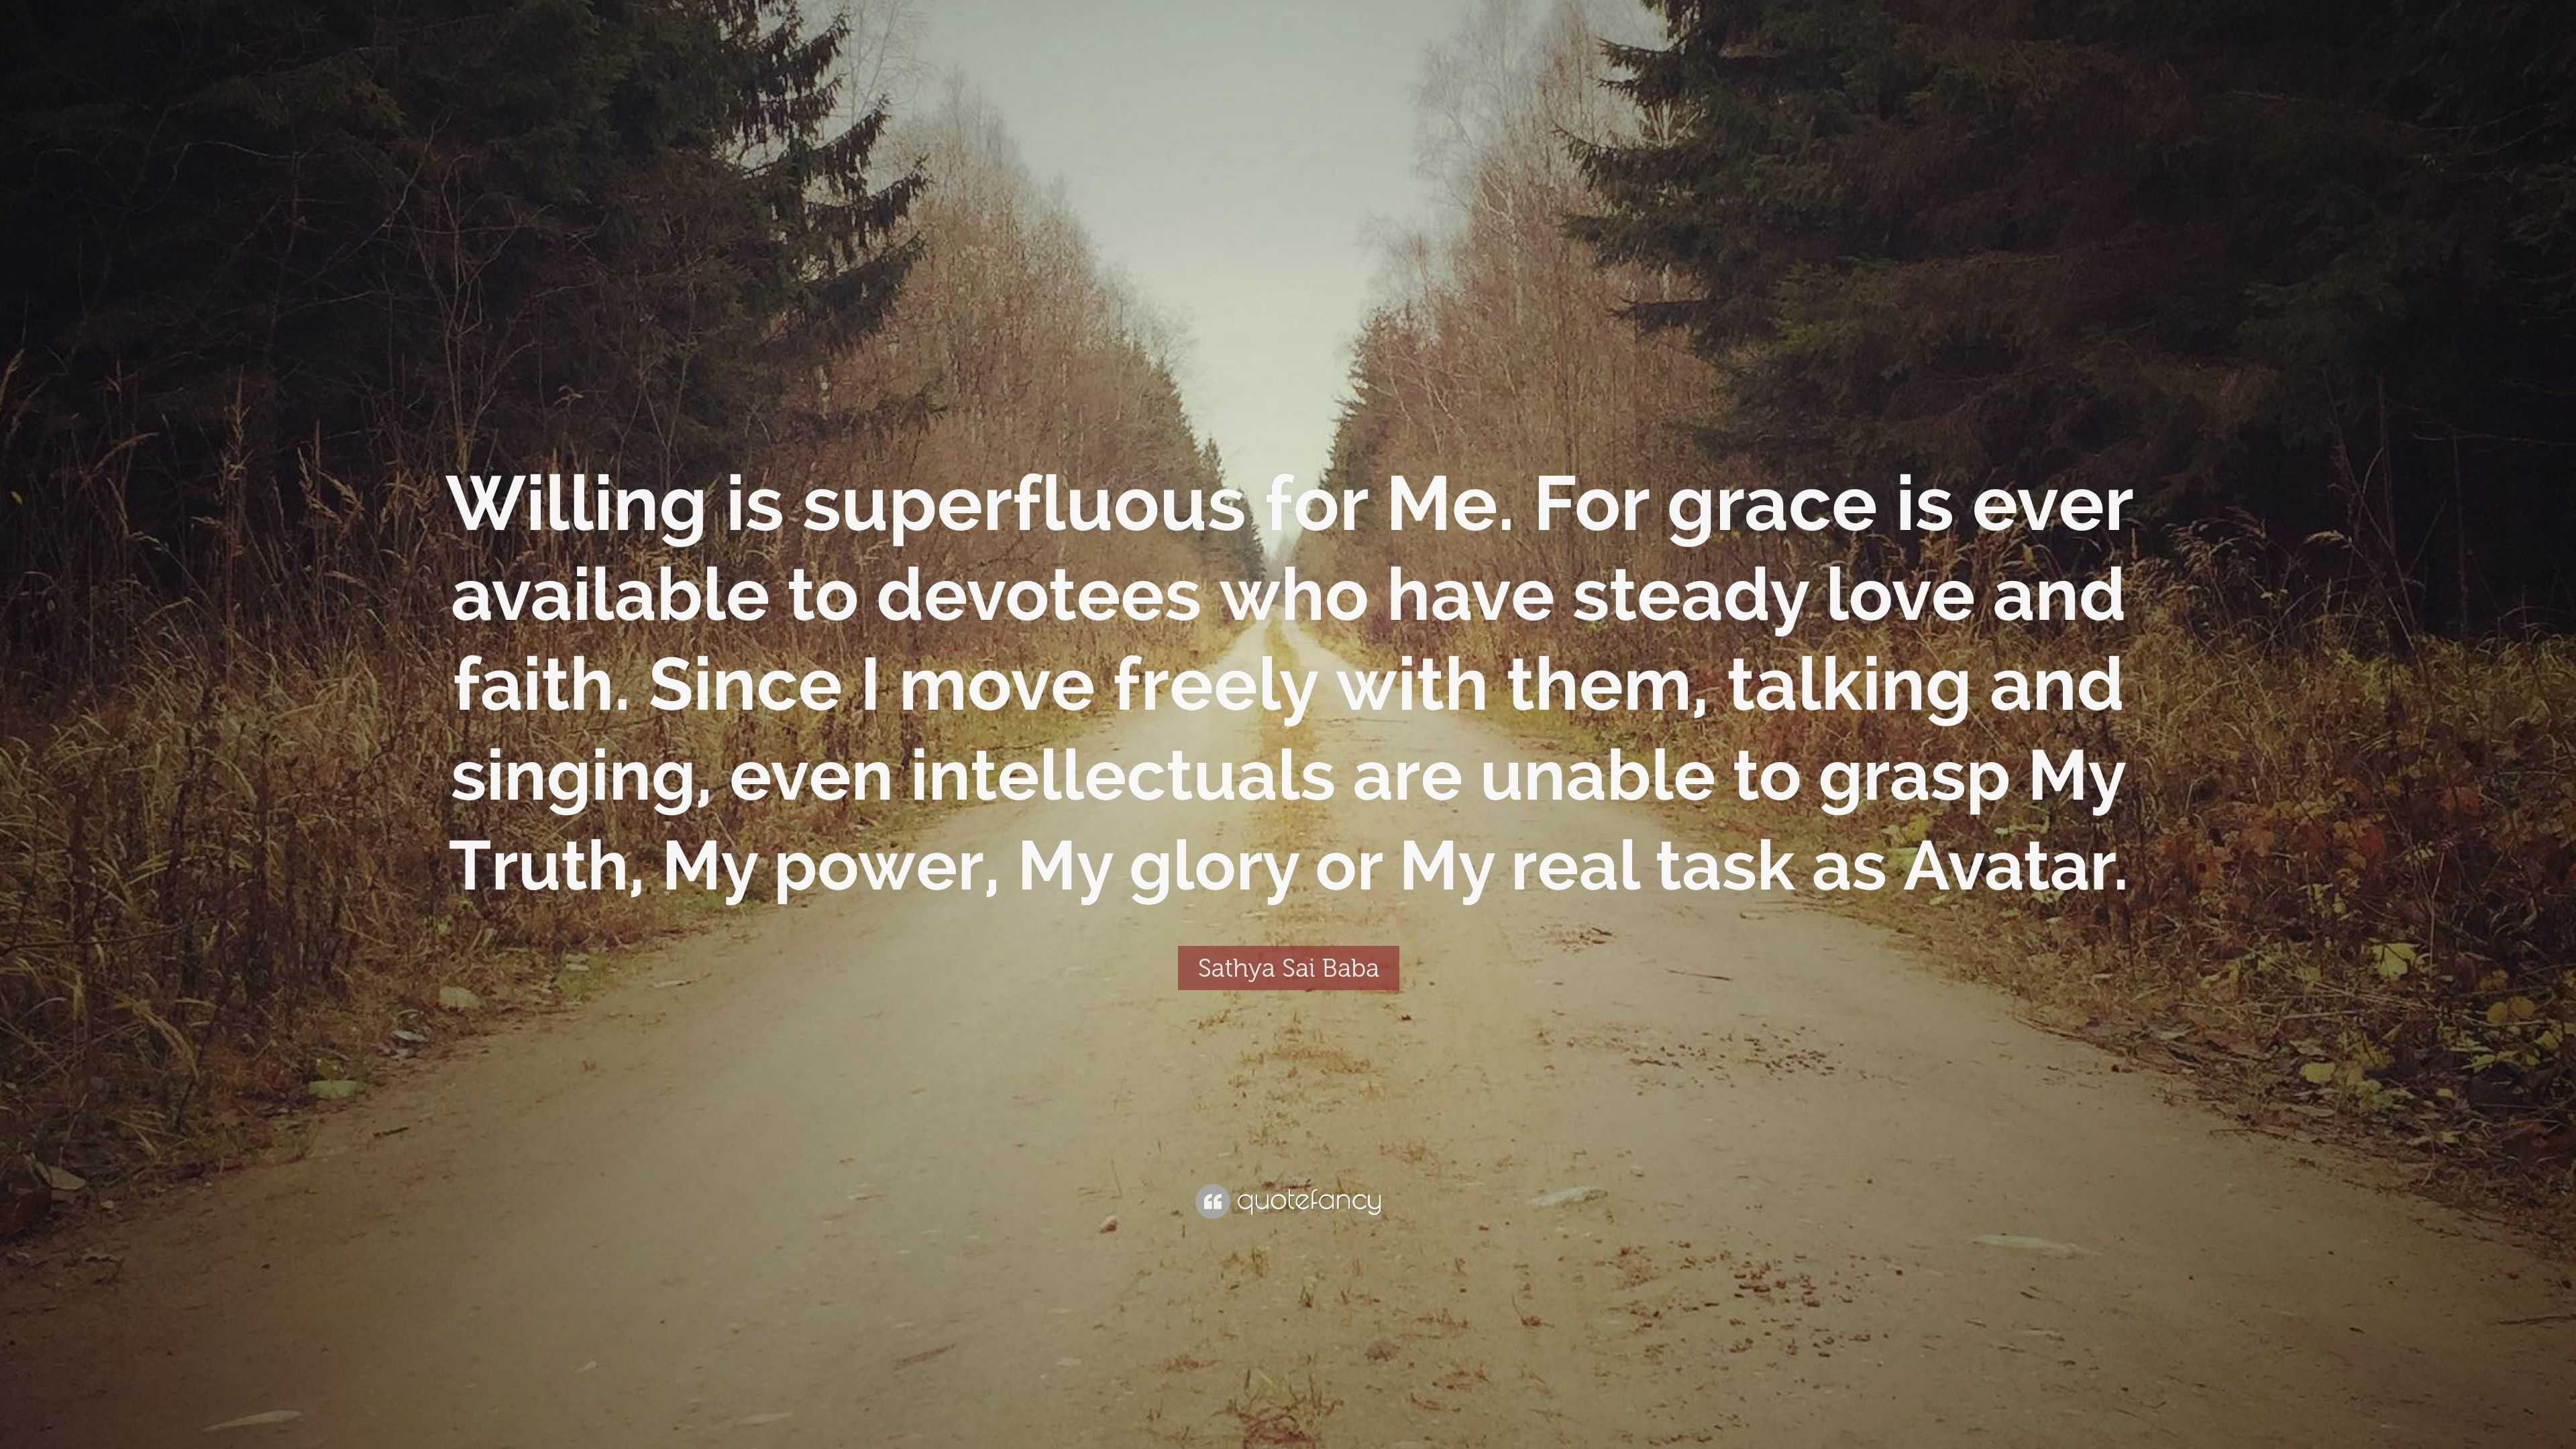 Sathya Sai Baba Quote: "Willing is superfluous for Me. For ...